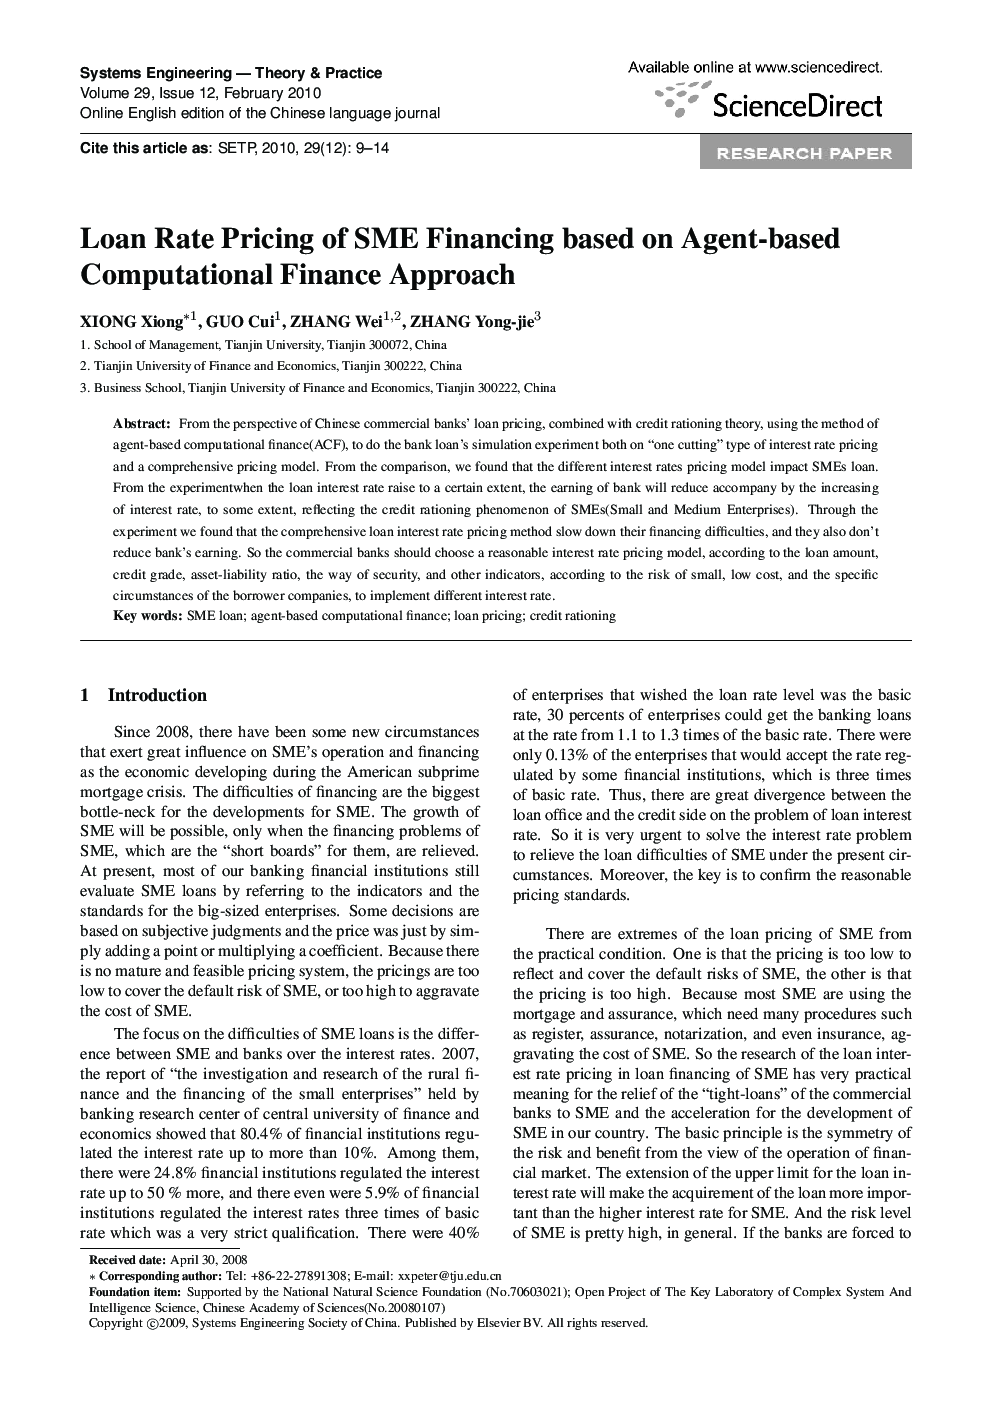 Loan Rate Pricing of SME Financing based on Agent-based Computational Finance Approach 